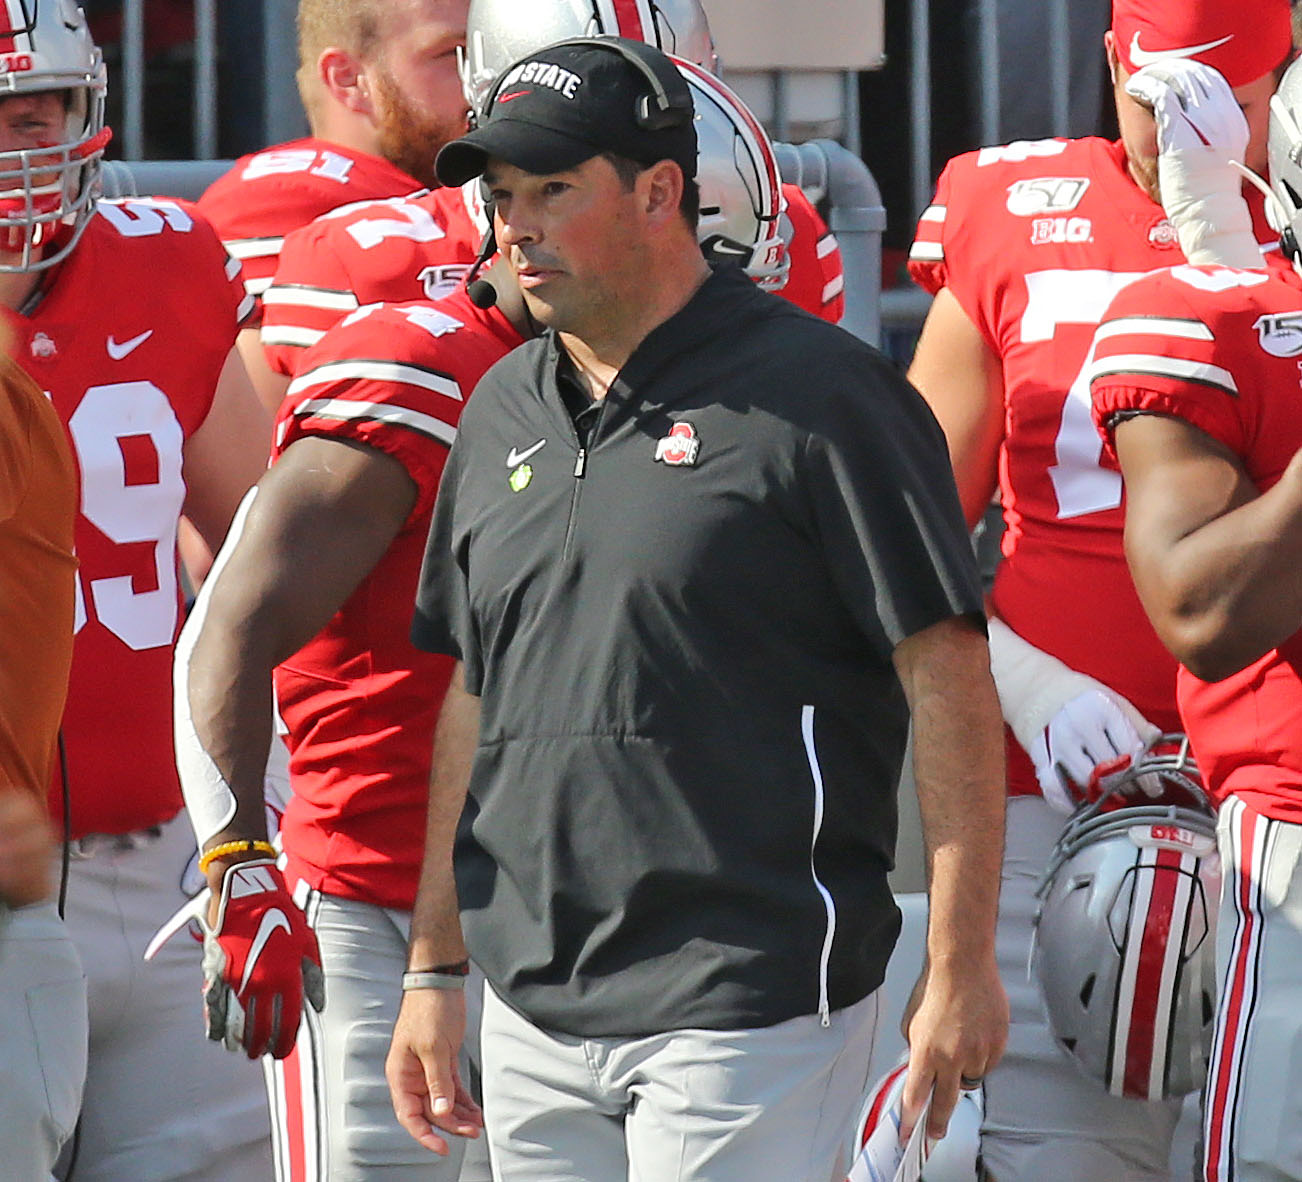 OSU football parents group urges schools to follow Buckeyes' COVID-19  standards